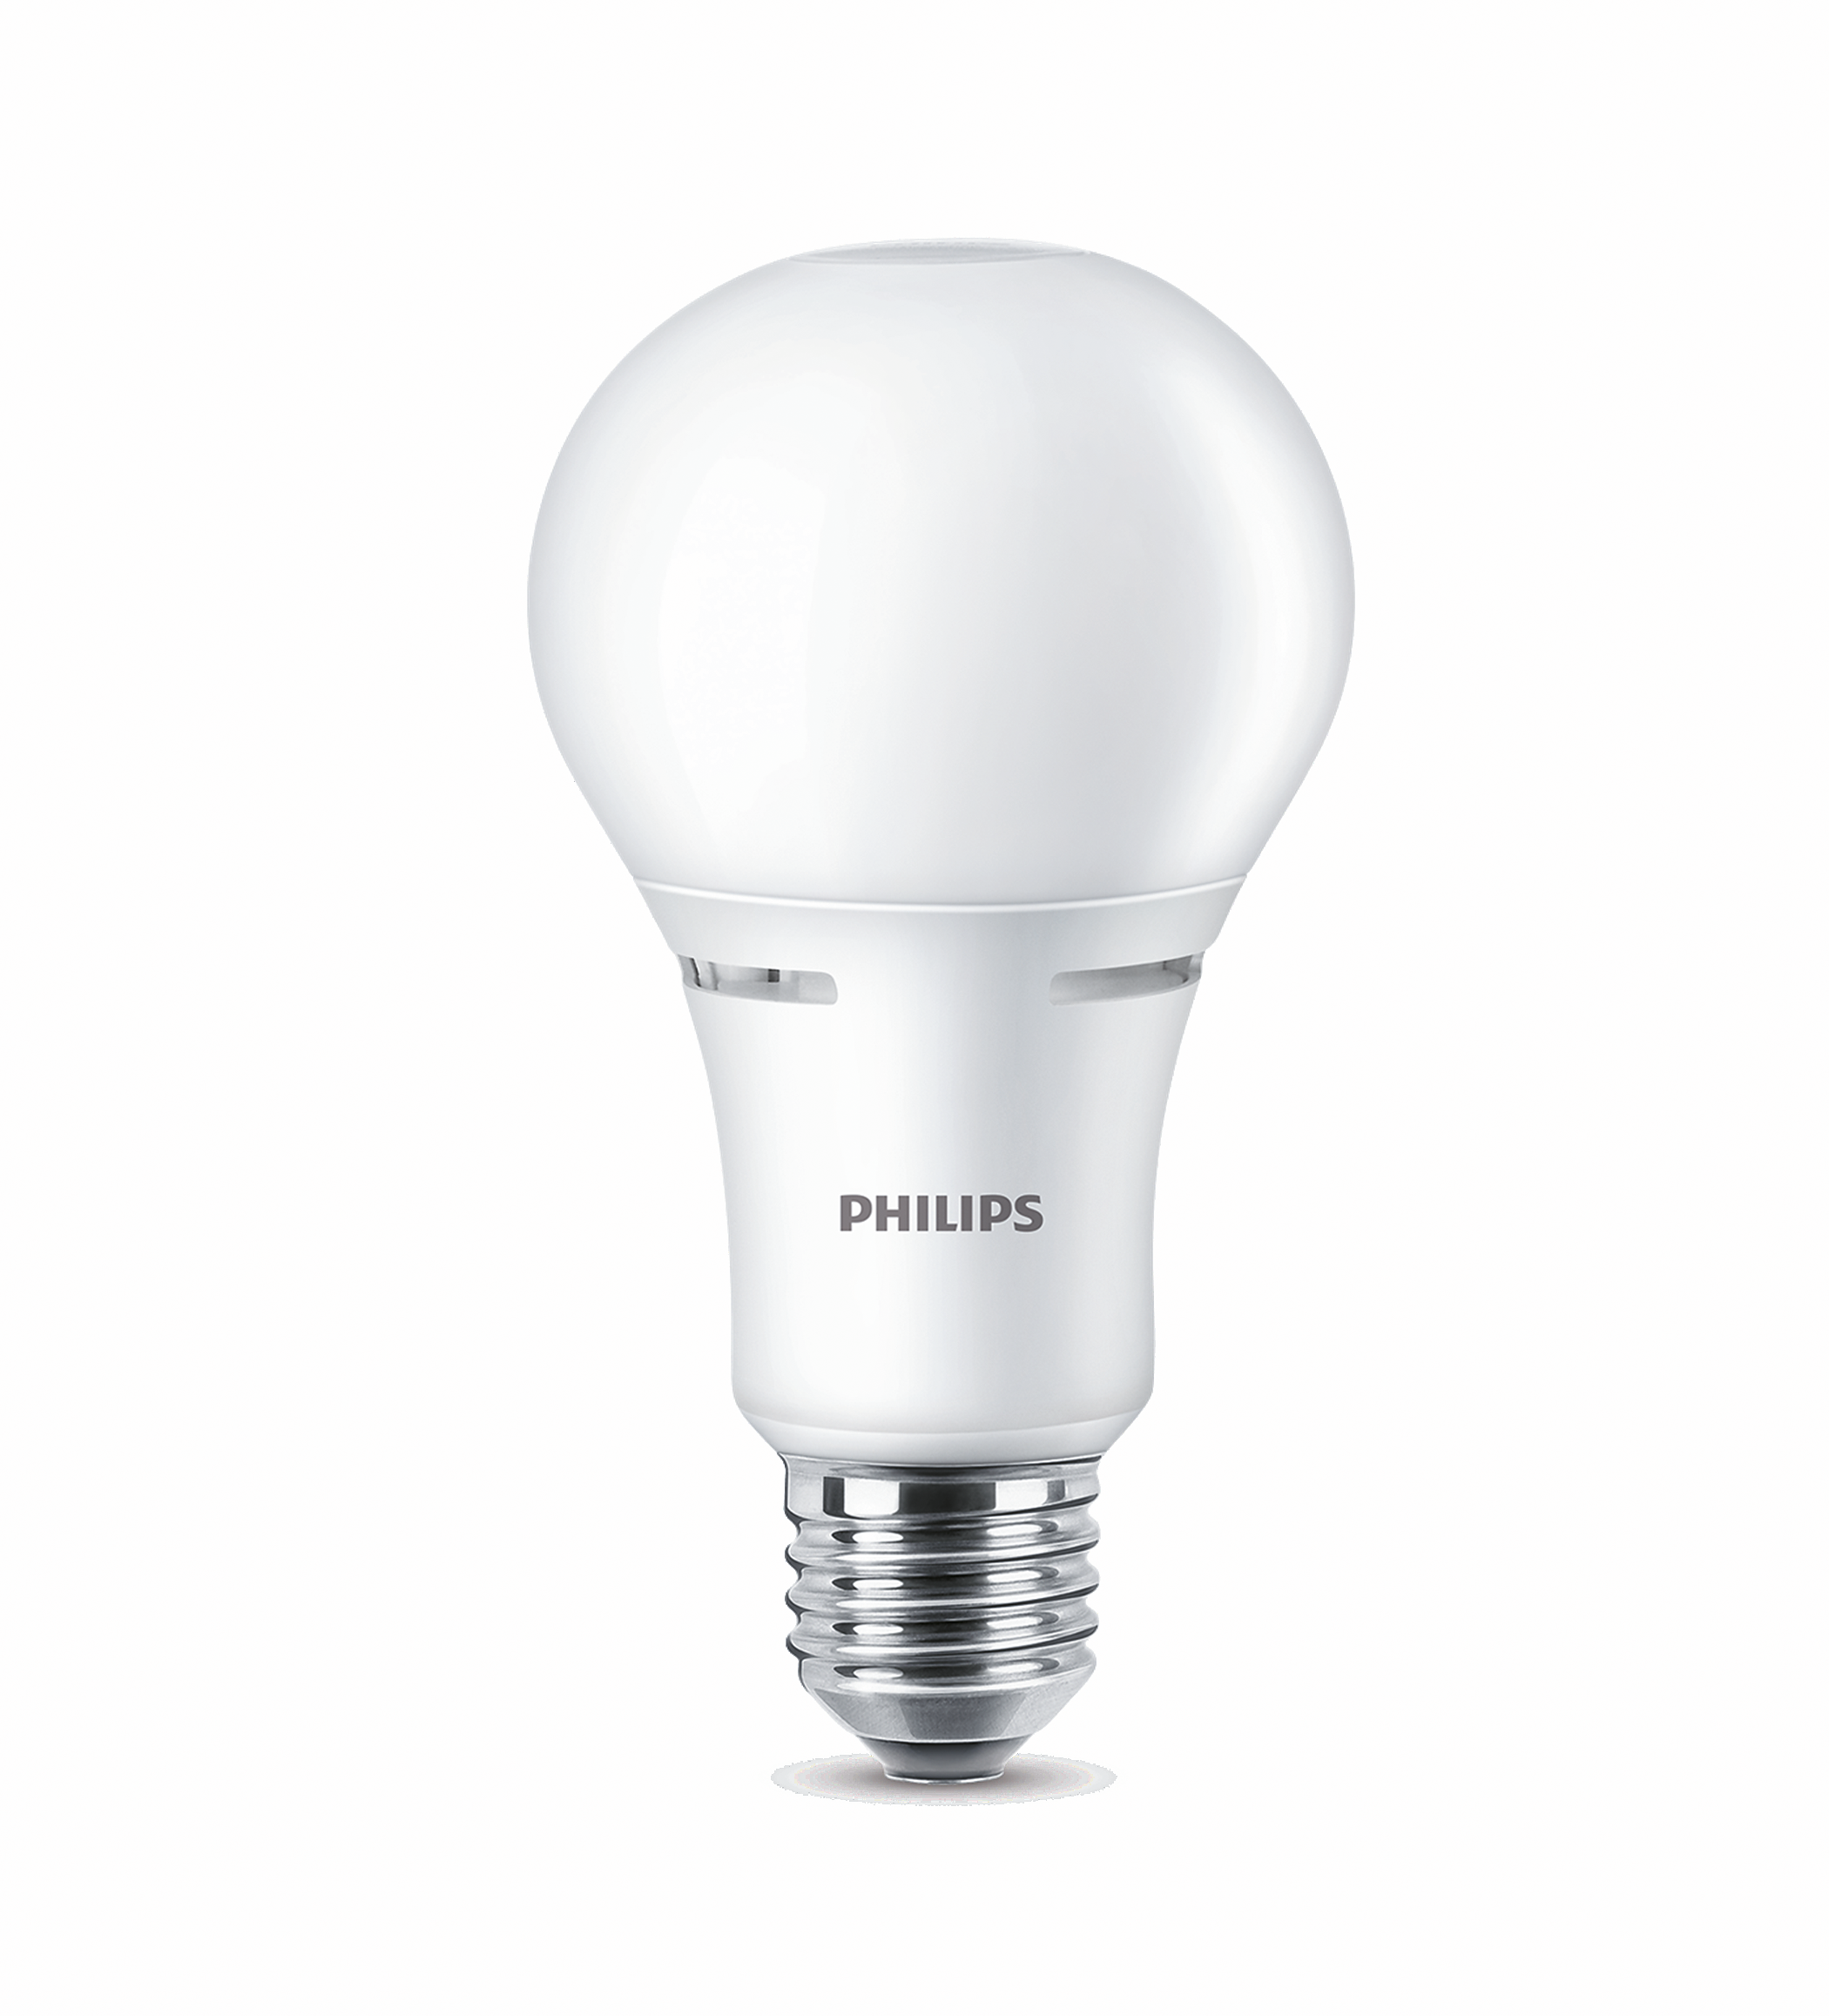 Led 3 Way 7403332 Philips, Can A 3 Way Light Bulb Be Used In Any Lamp